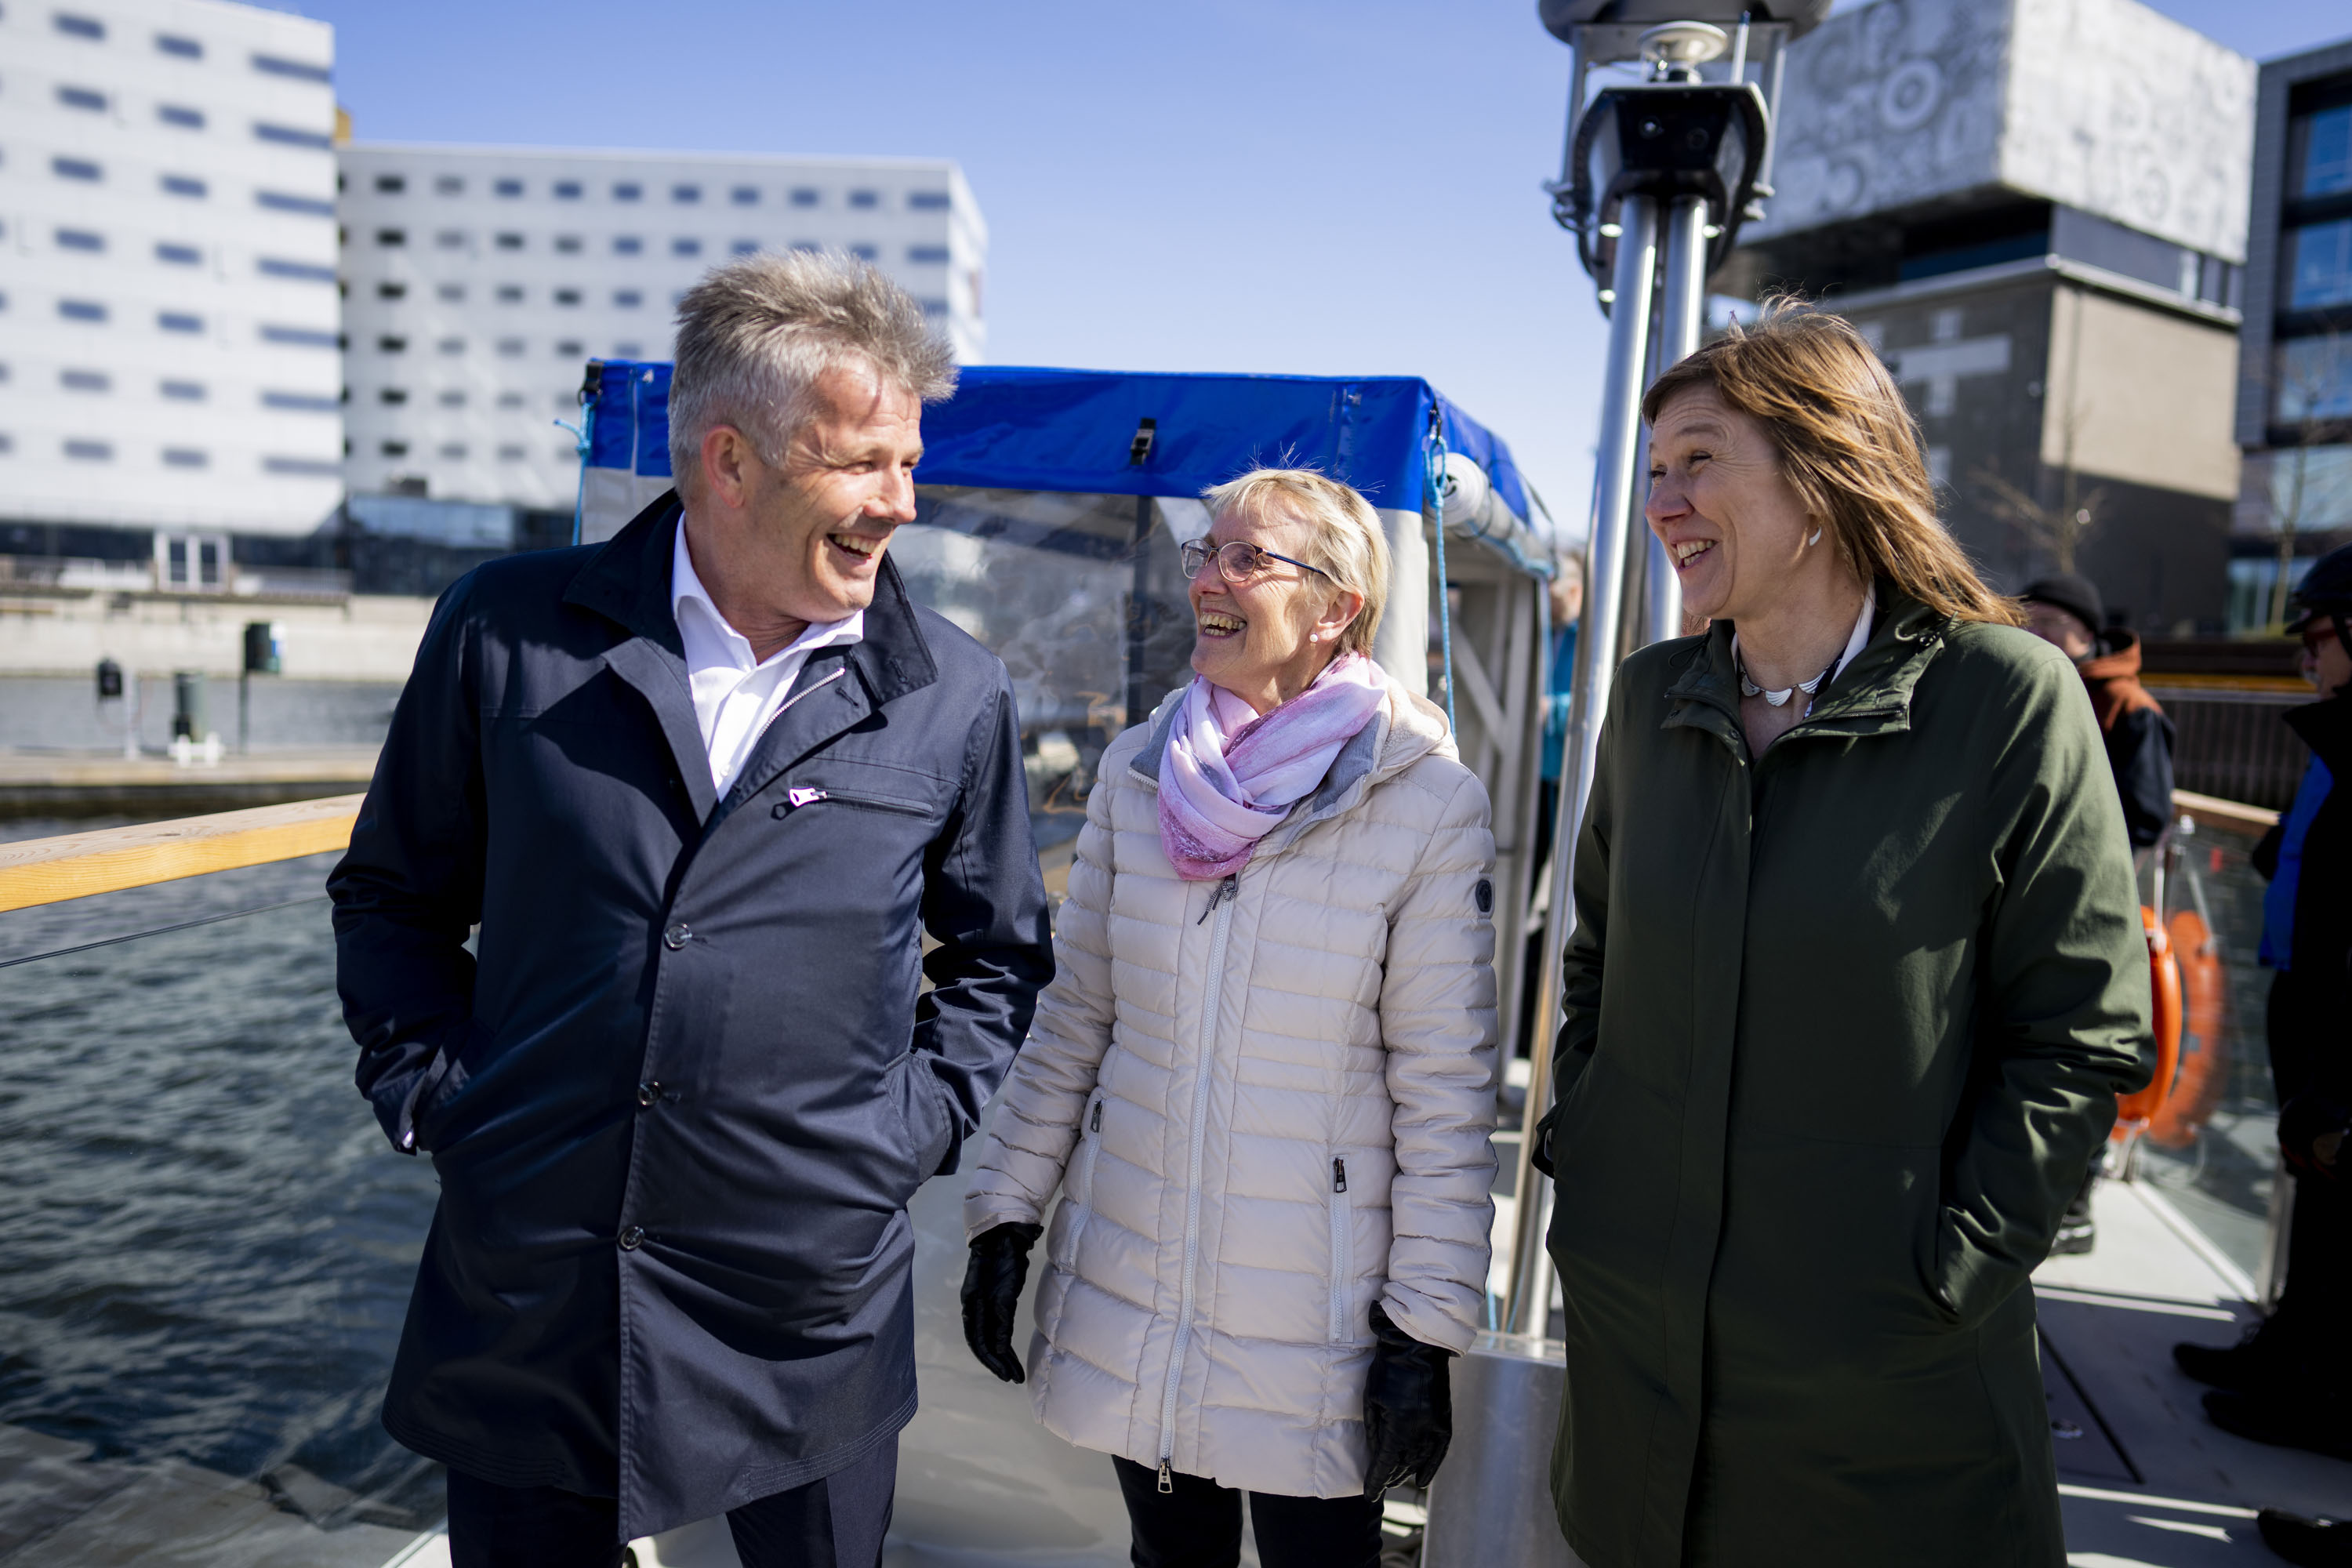 Minister of Fisheries and Ocean Policy Bjørnar Skjæran on demo tour in Brattøra, Trondheim, at Ocean Week 2022 with NTNU rector Anne Borg and NTNU Oceans director Siri Granum Carson. Photo: Ole Martin Wold/NTNU Oceans.